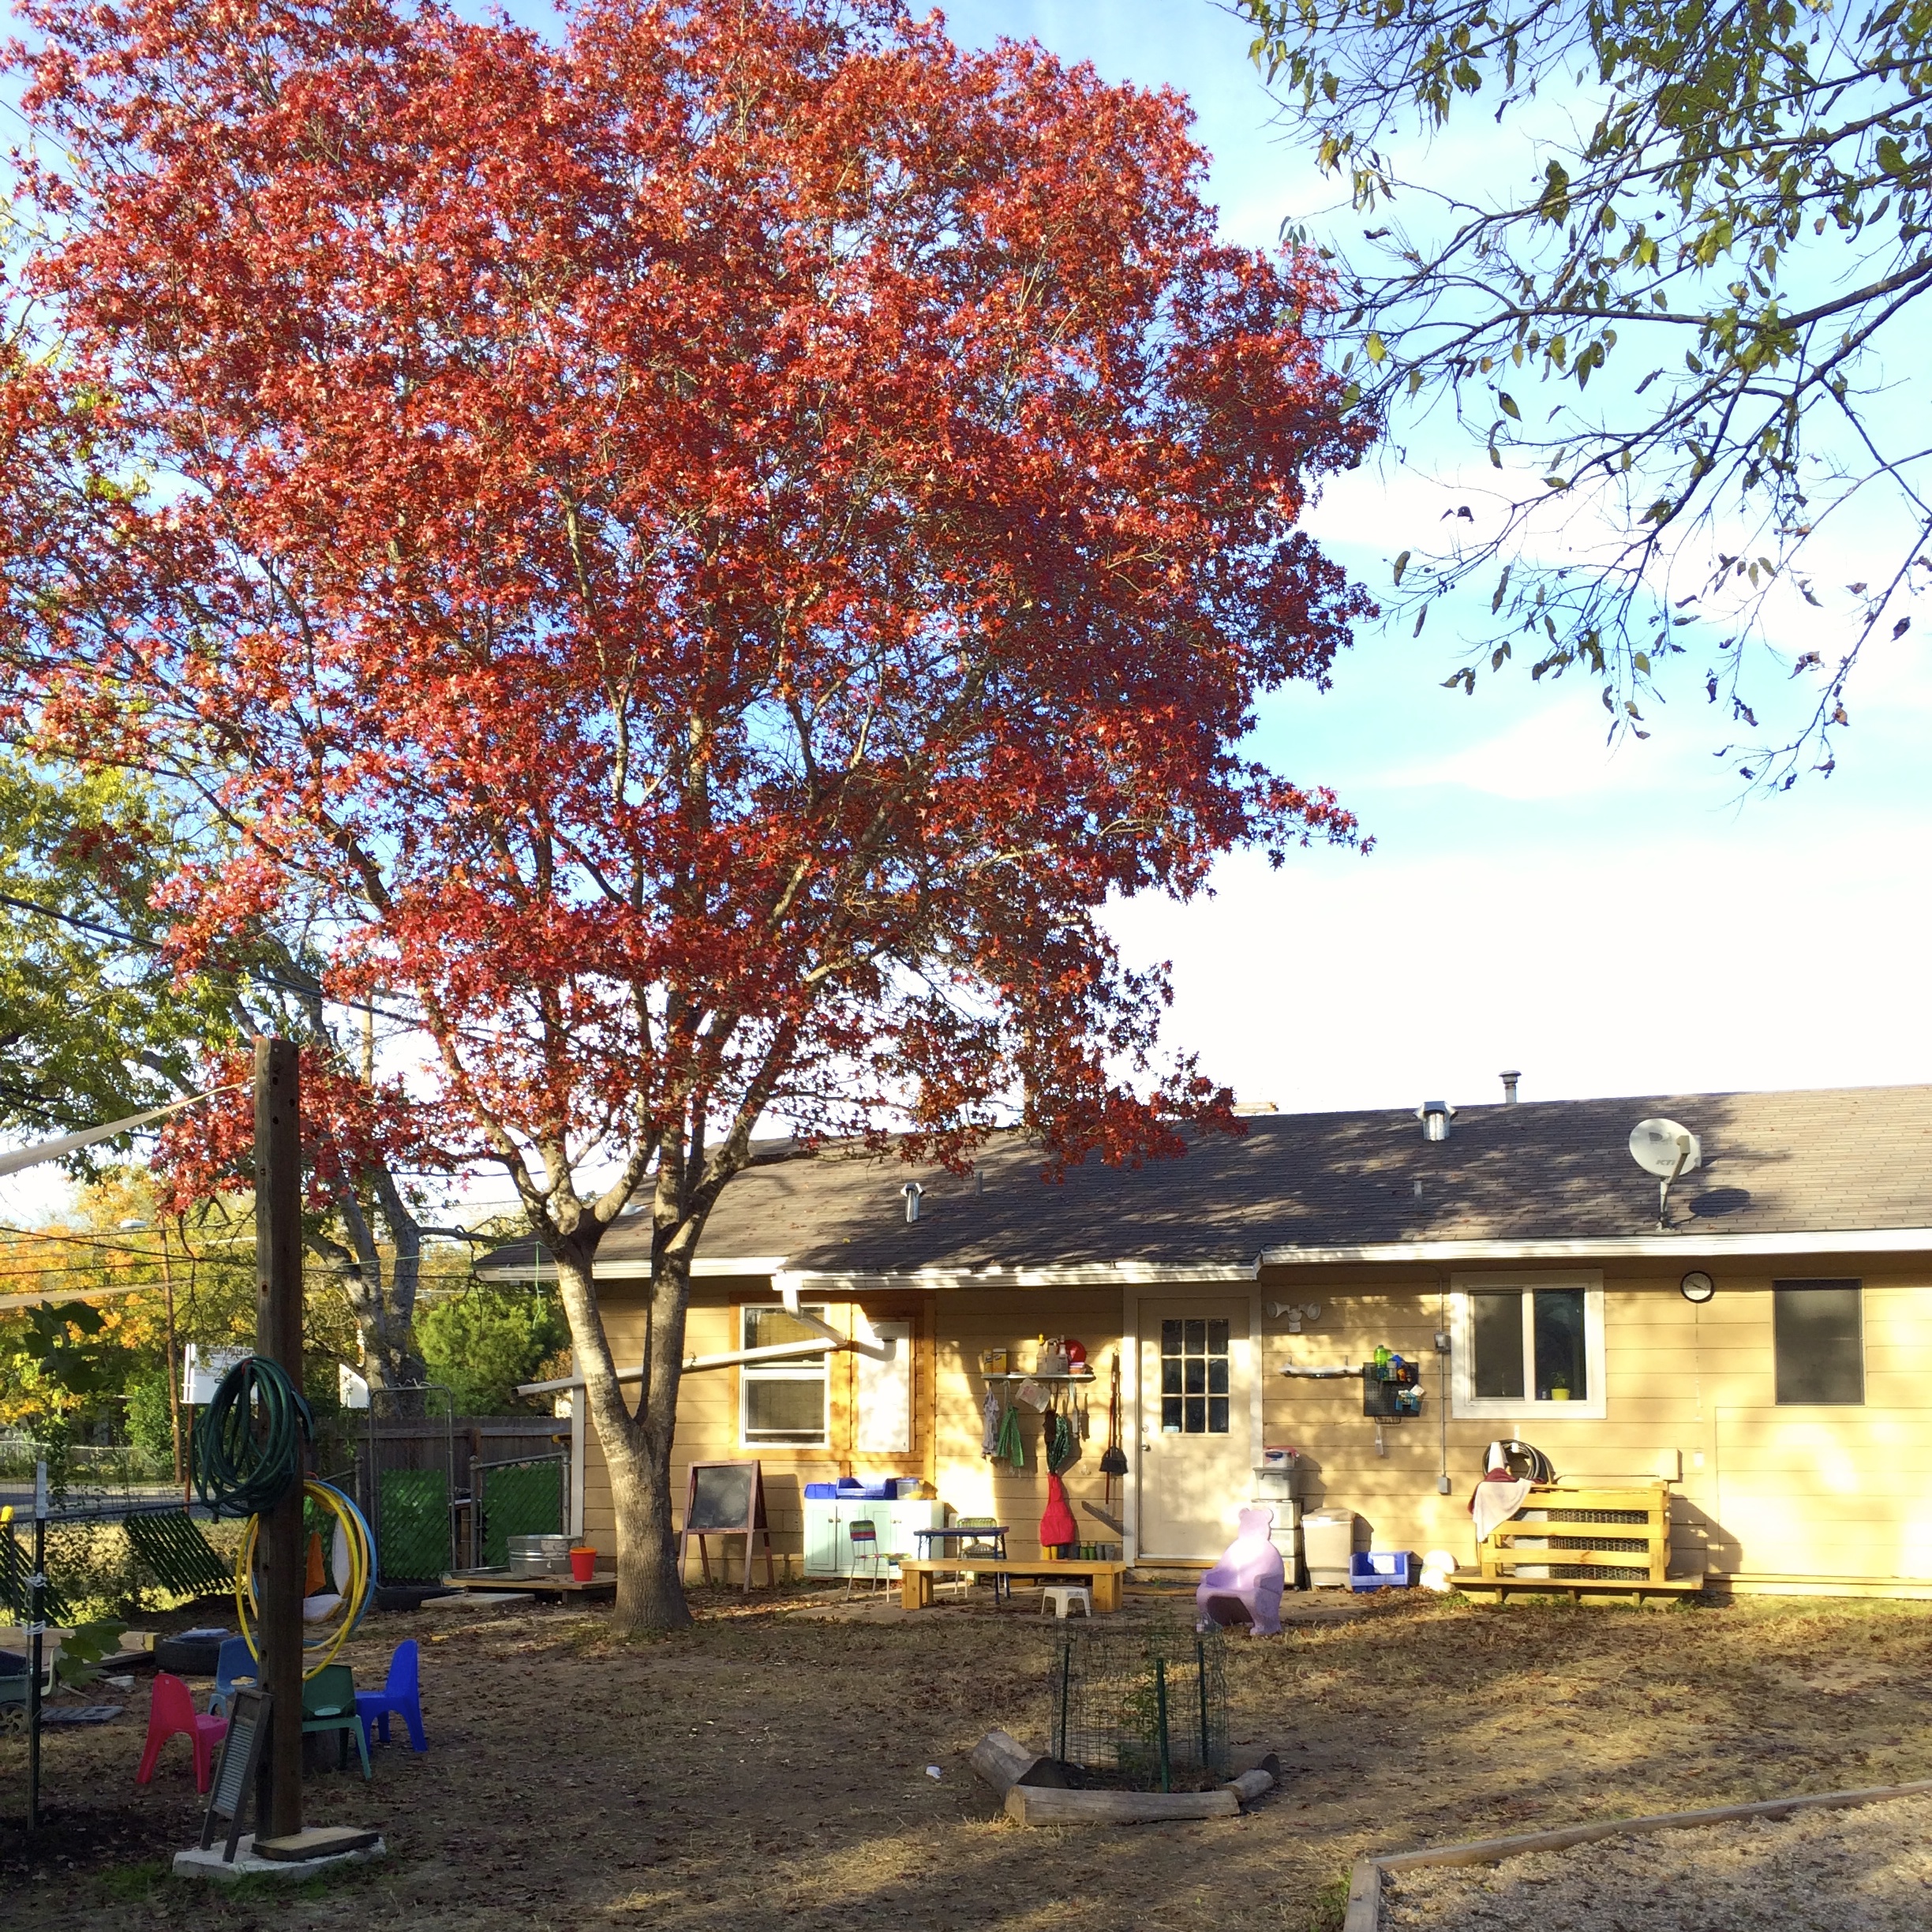 Our Red Oak was magnificent in 2013